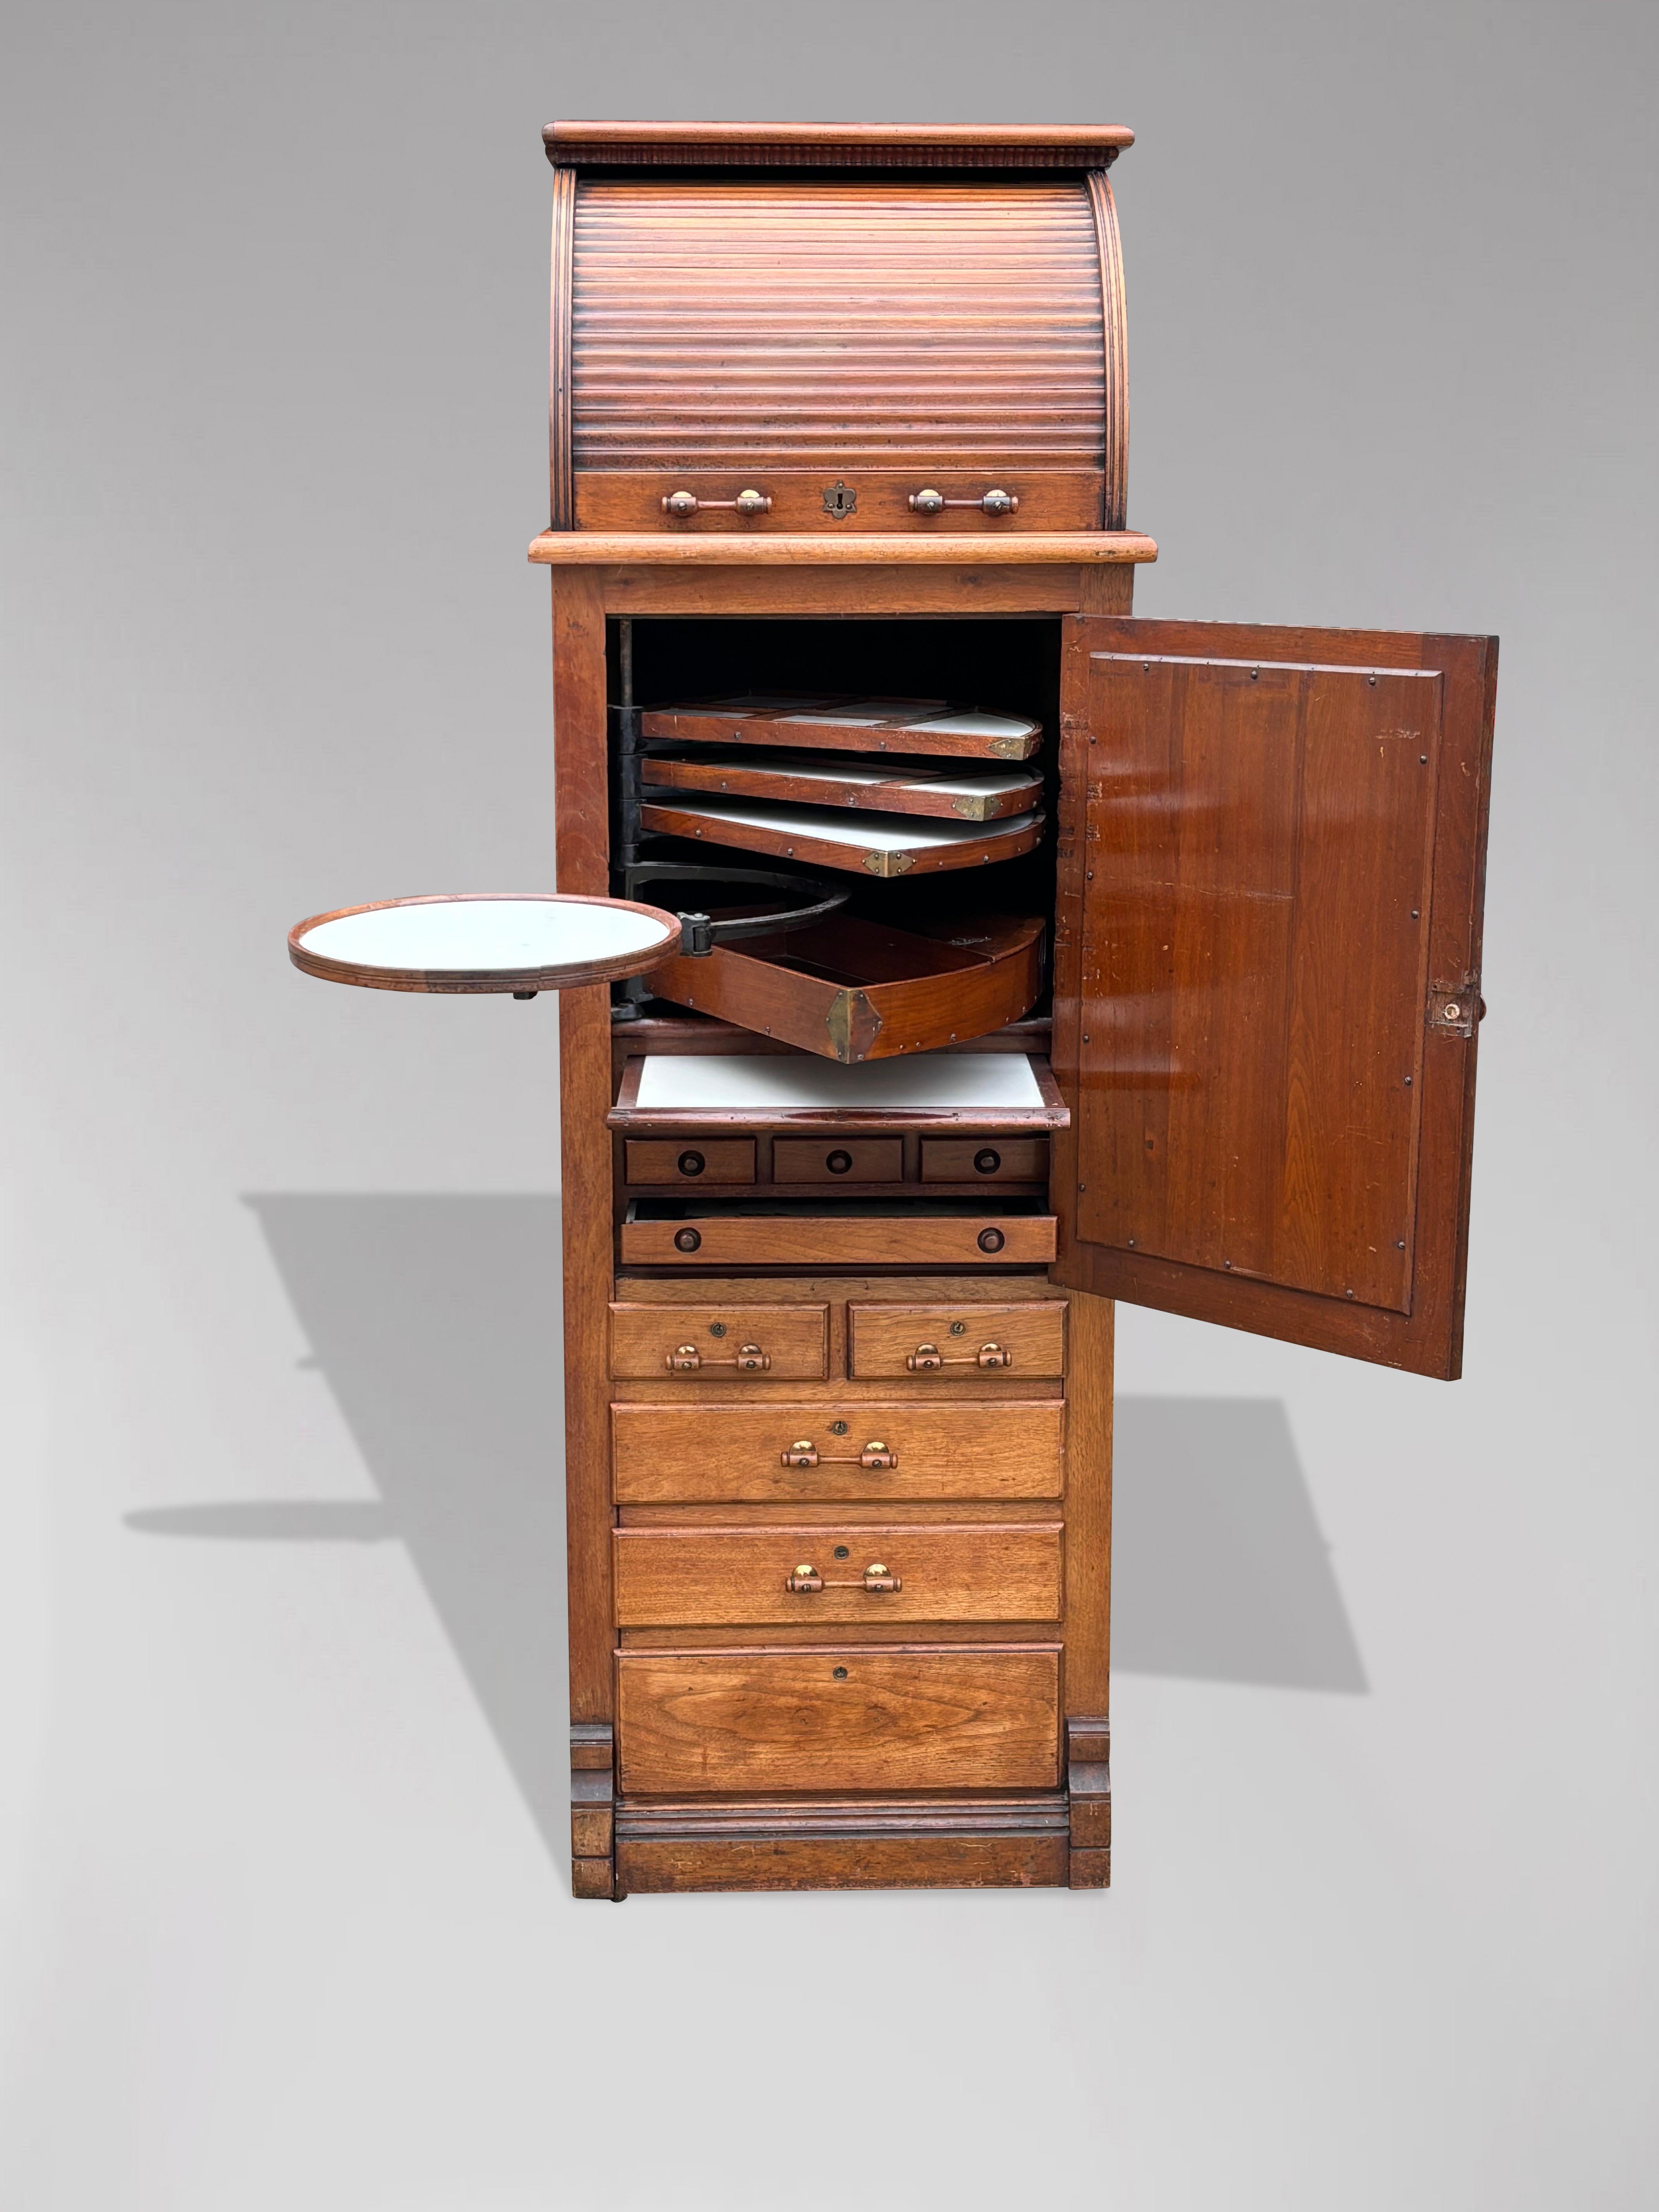 A 19th century oak dental cabinet, made by the Harvard & Co. in Canton, Ohio. This is the deluxe model made of quarter sawn oak with a finished back. An oak tambour roll over top section, above a cabinet with original bevelled glass mirrored door,